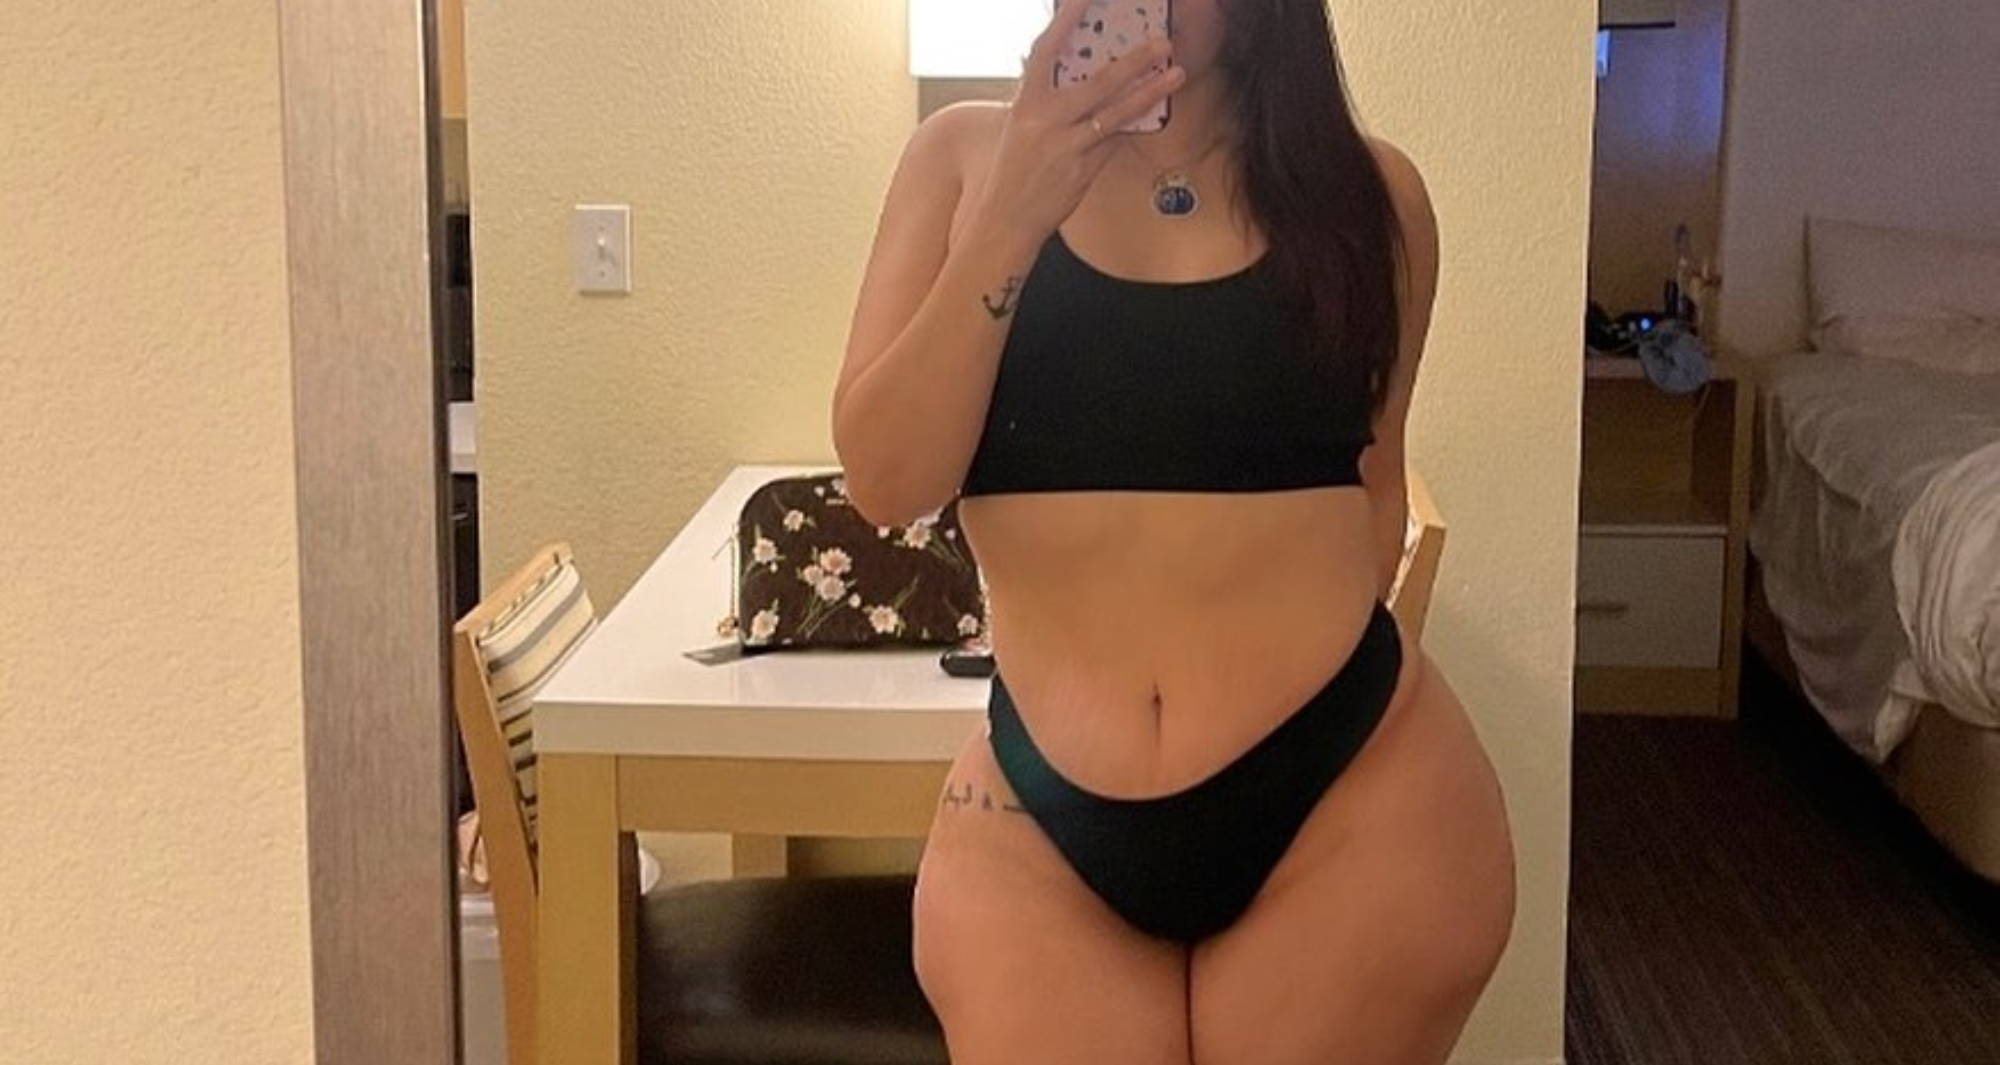  curvy woman takes a mirror selfie while wearing a black bralette and underwear set